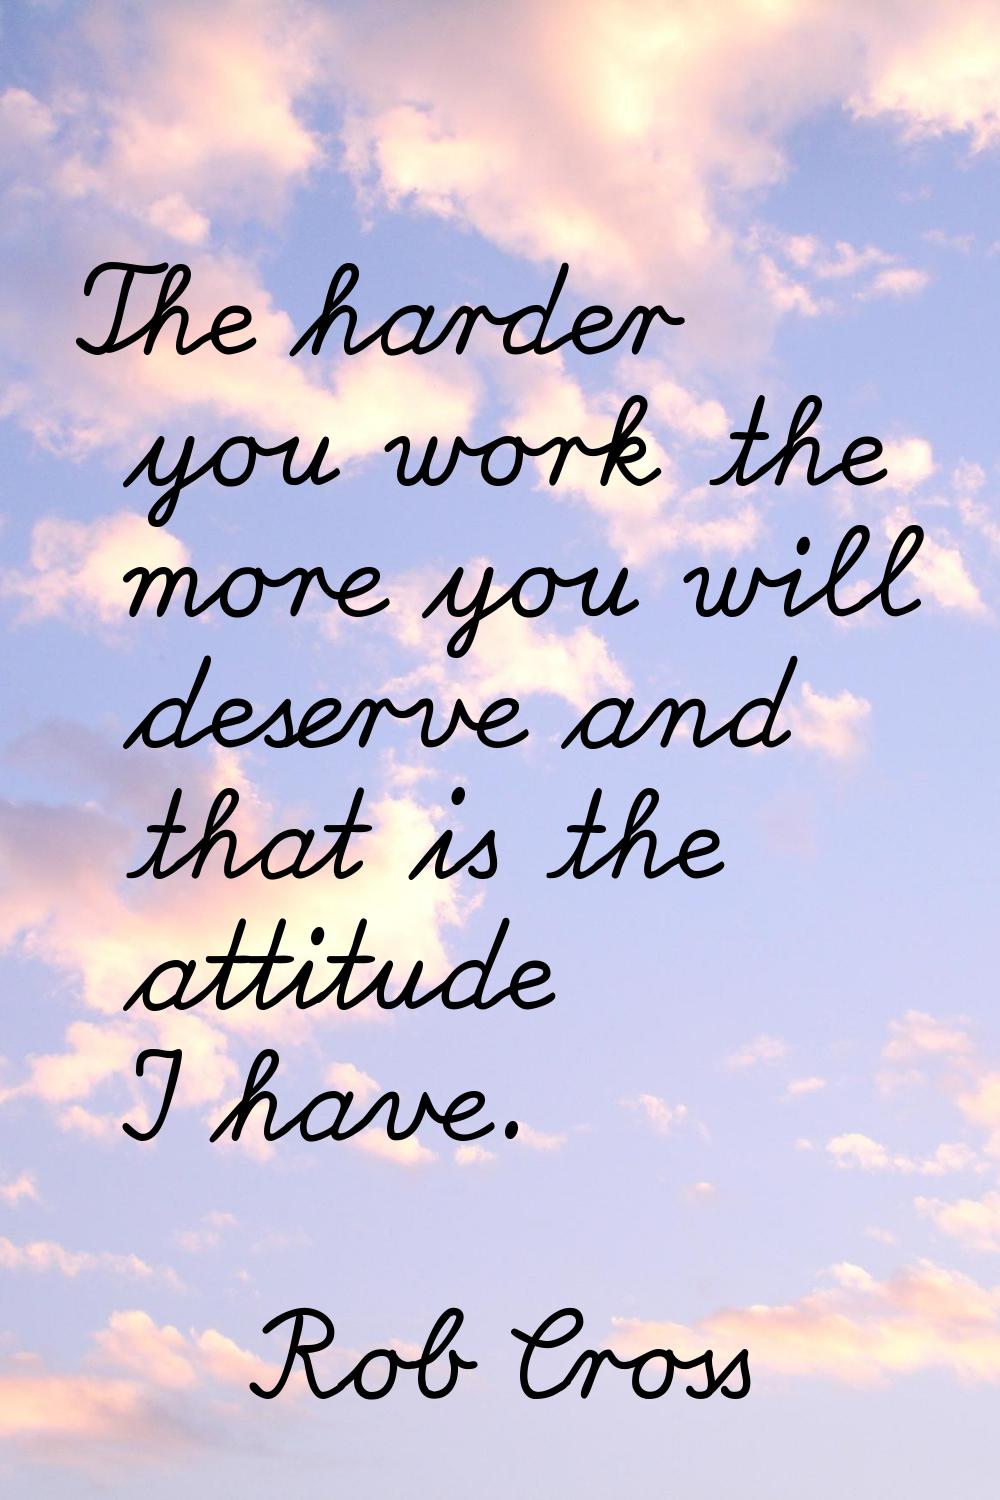 The harder you work the more you will deserve and that is the attitude I have.